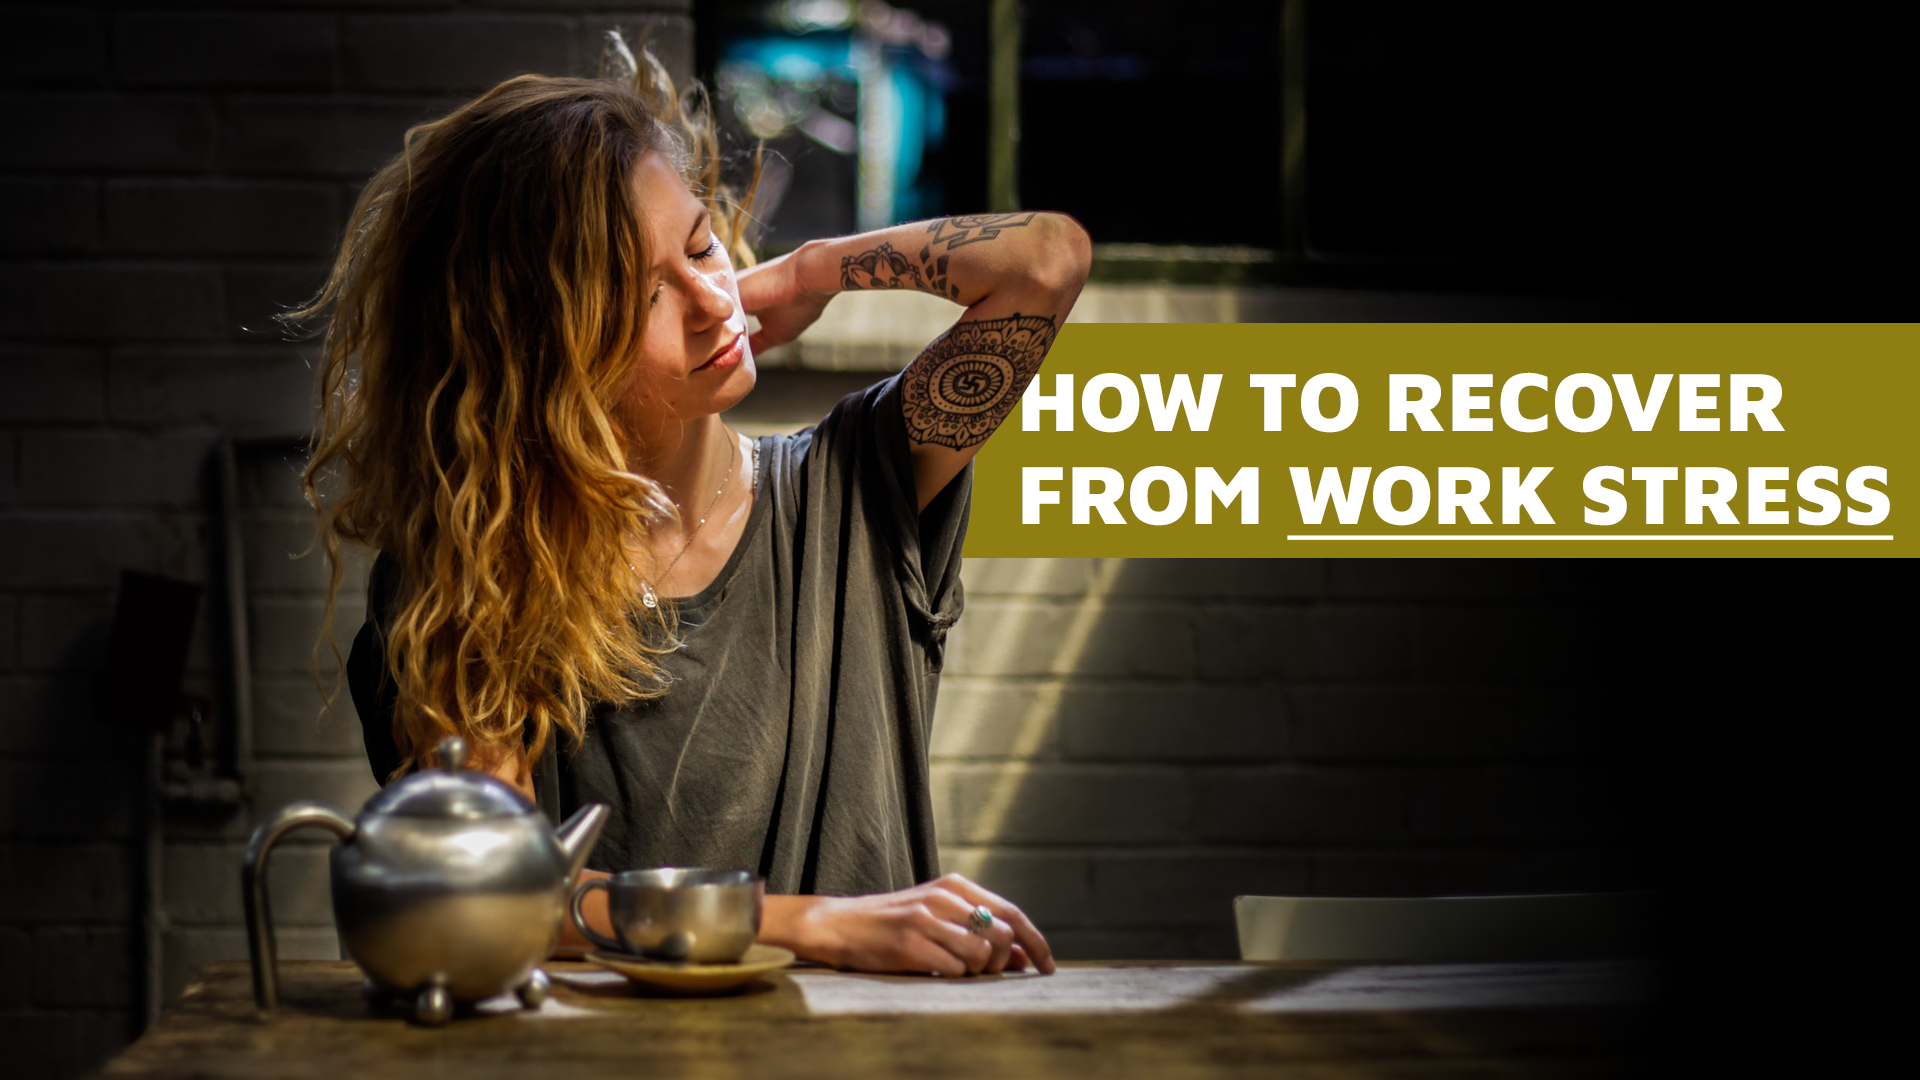 How to Recover from Work Stress